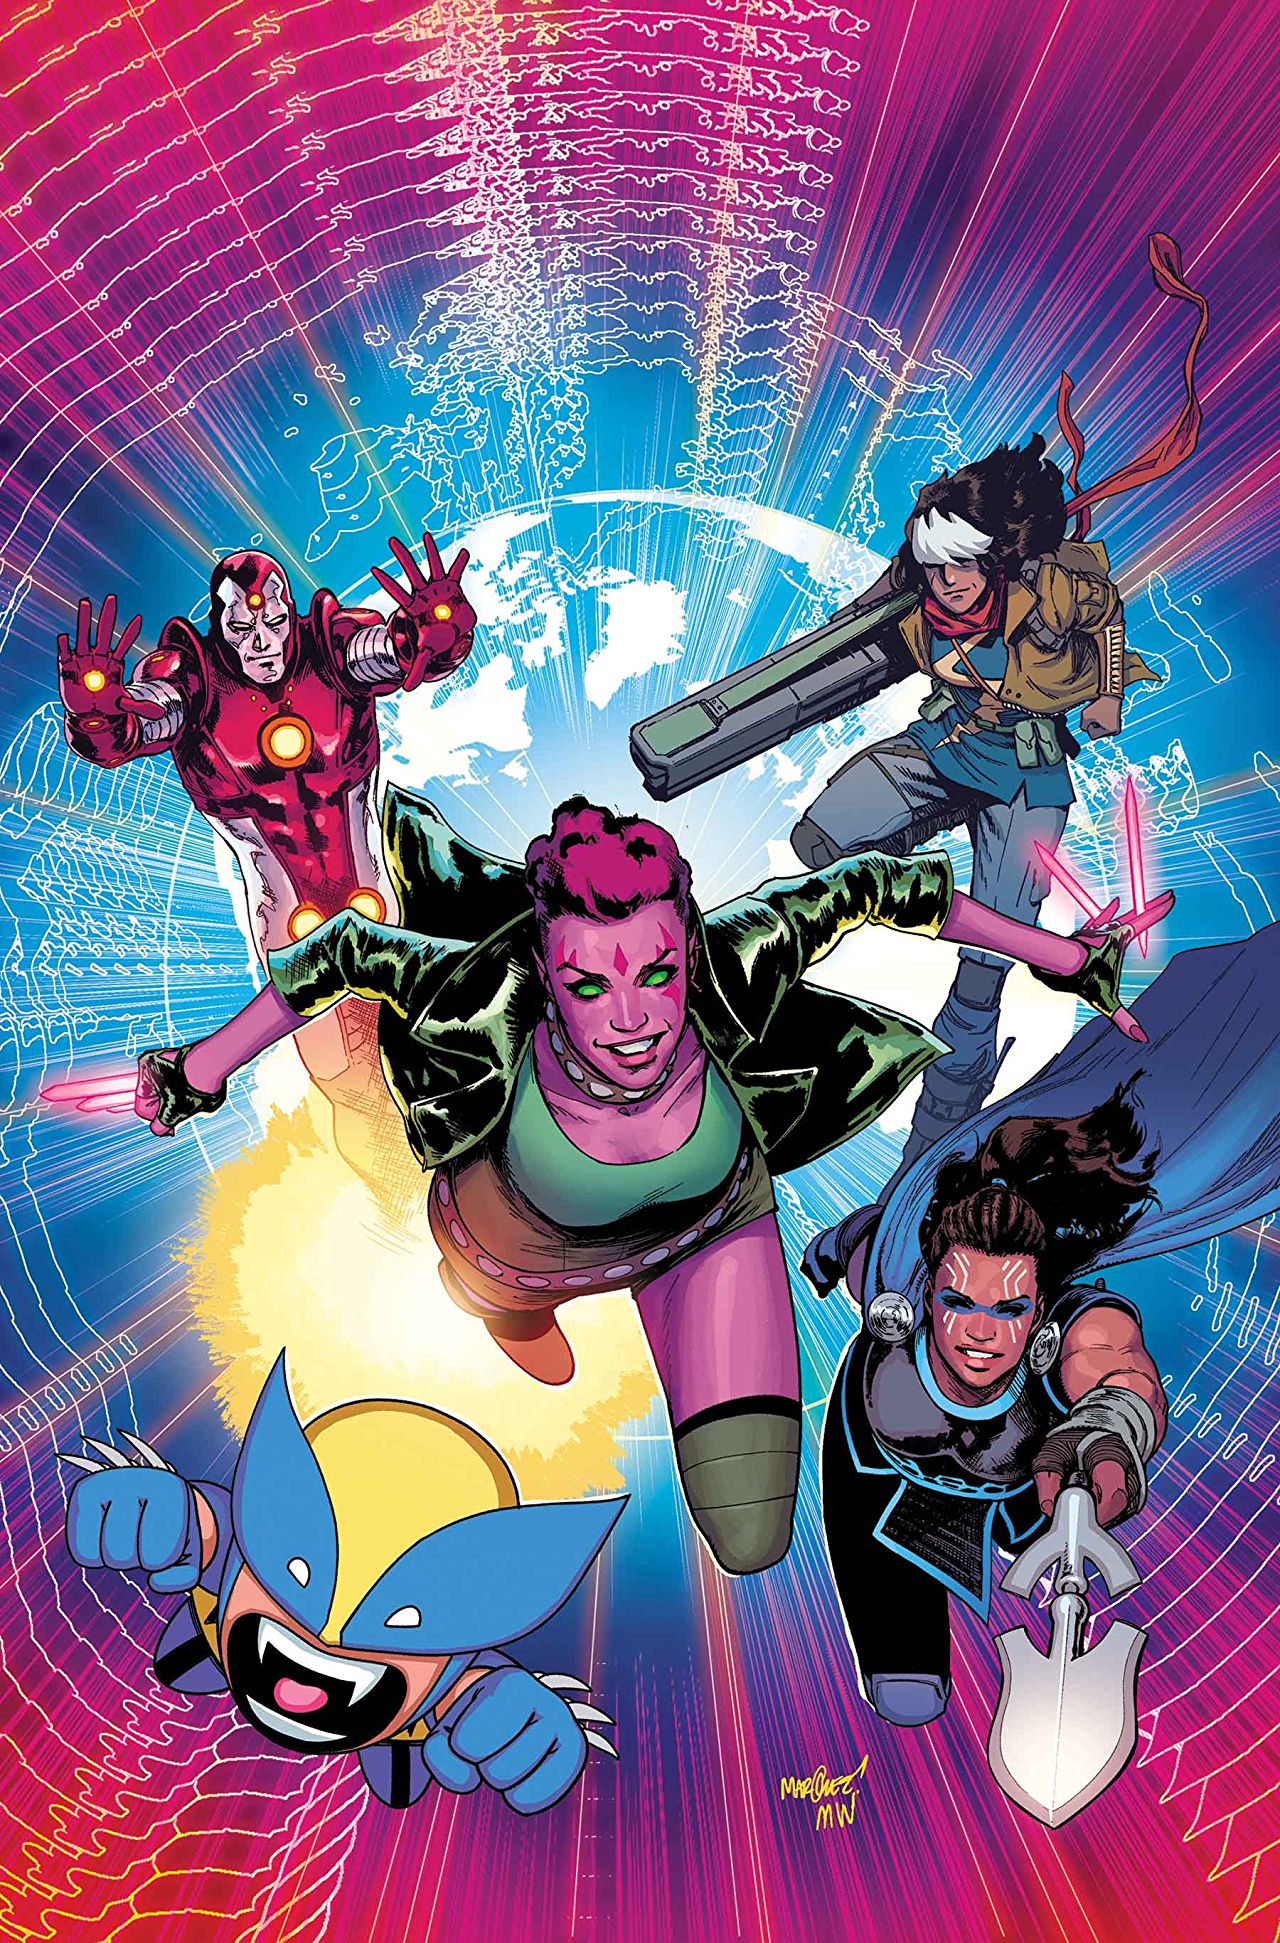 First Look: Exiles #1 from Saladin Ahmed and Javier Rodriguez